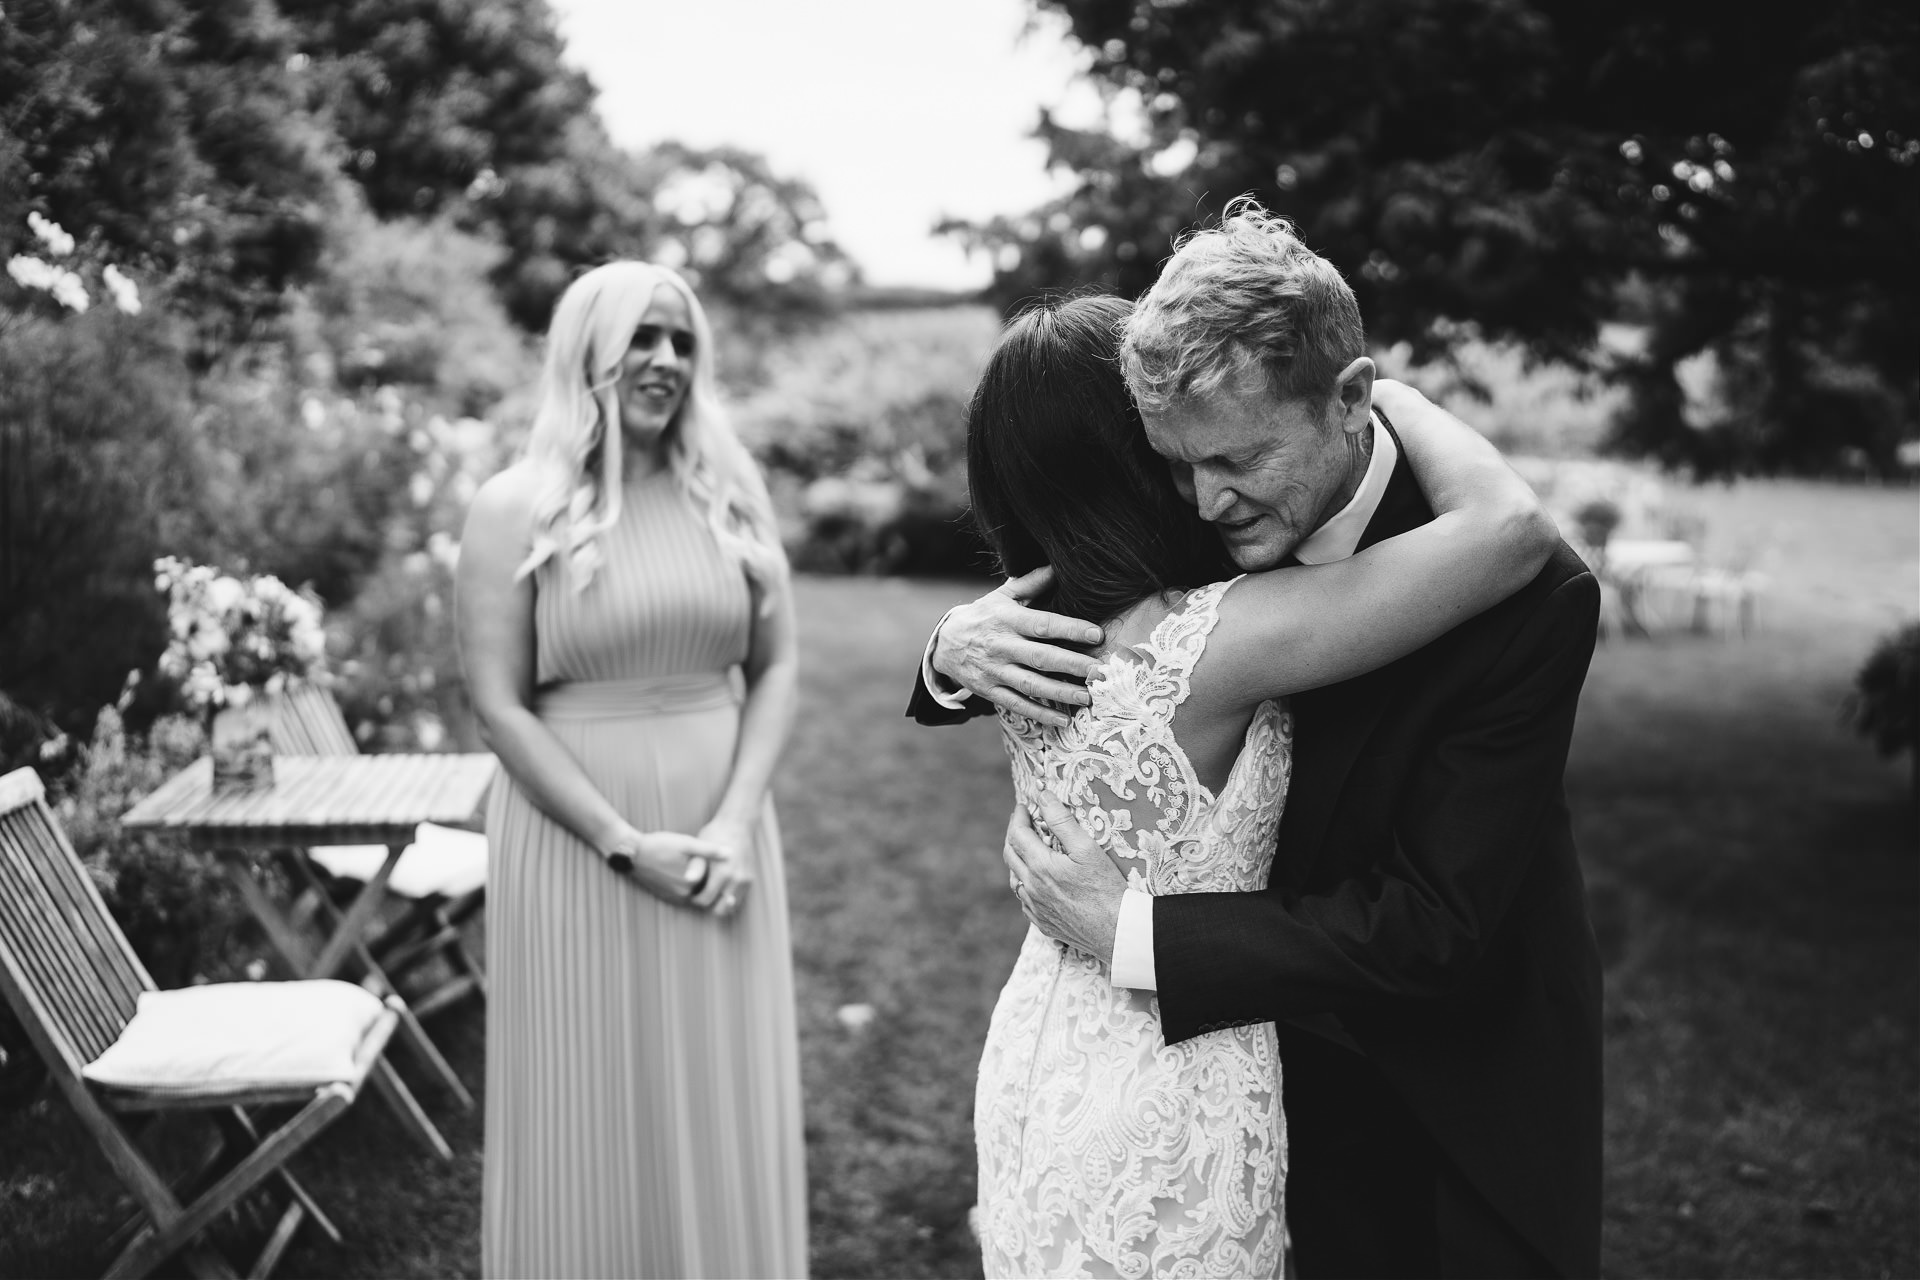 Father hugging a bride to be, with bridesmaid watching in a garden